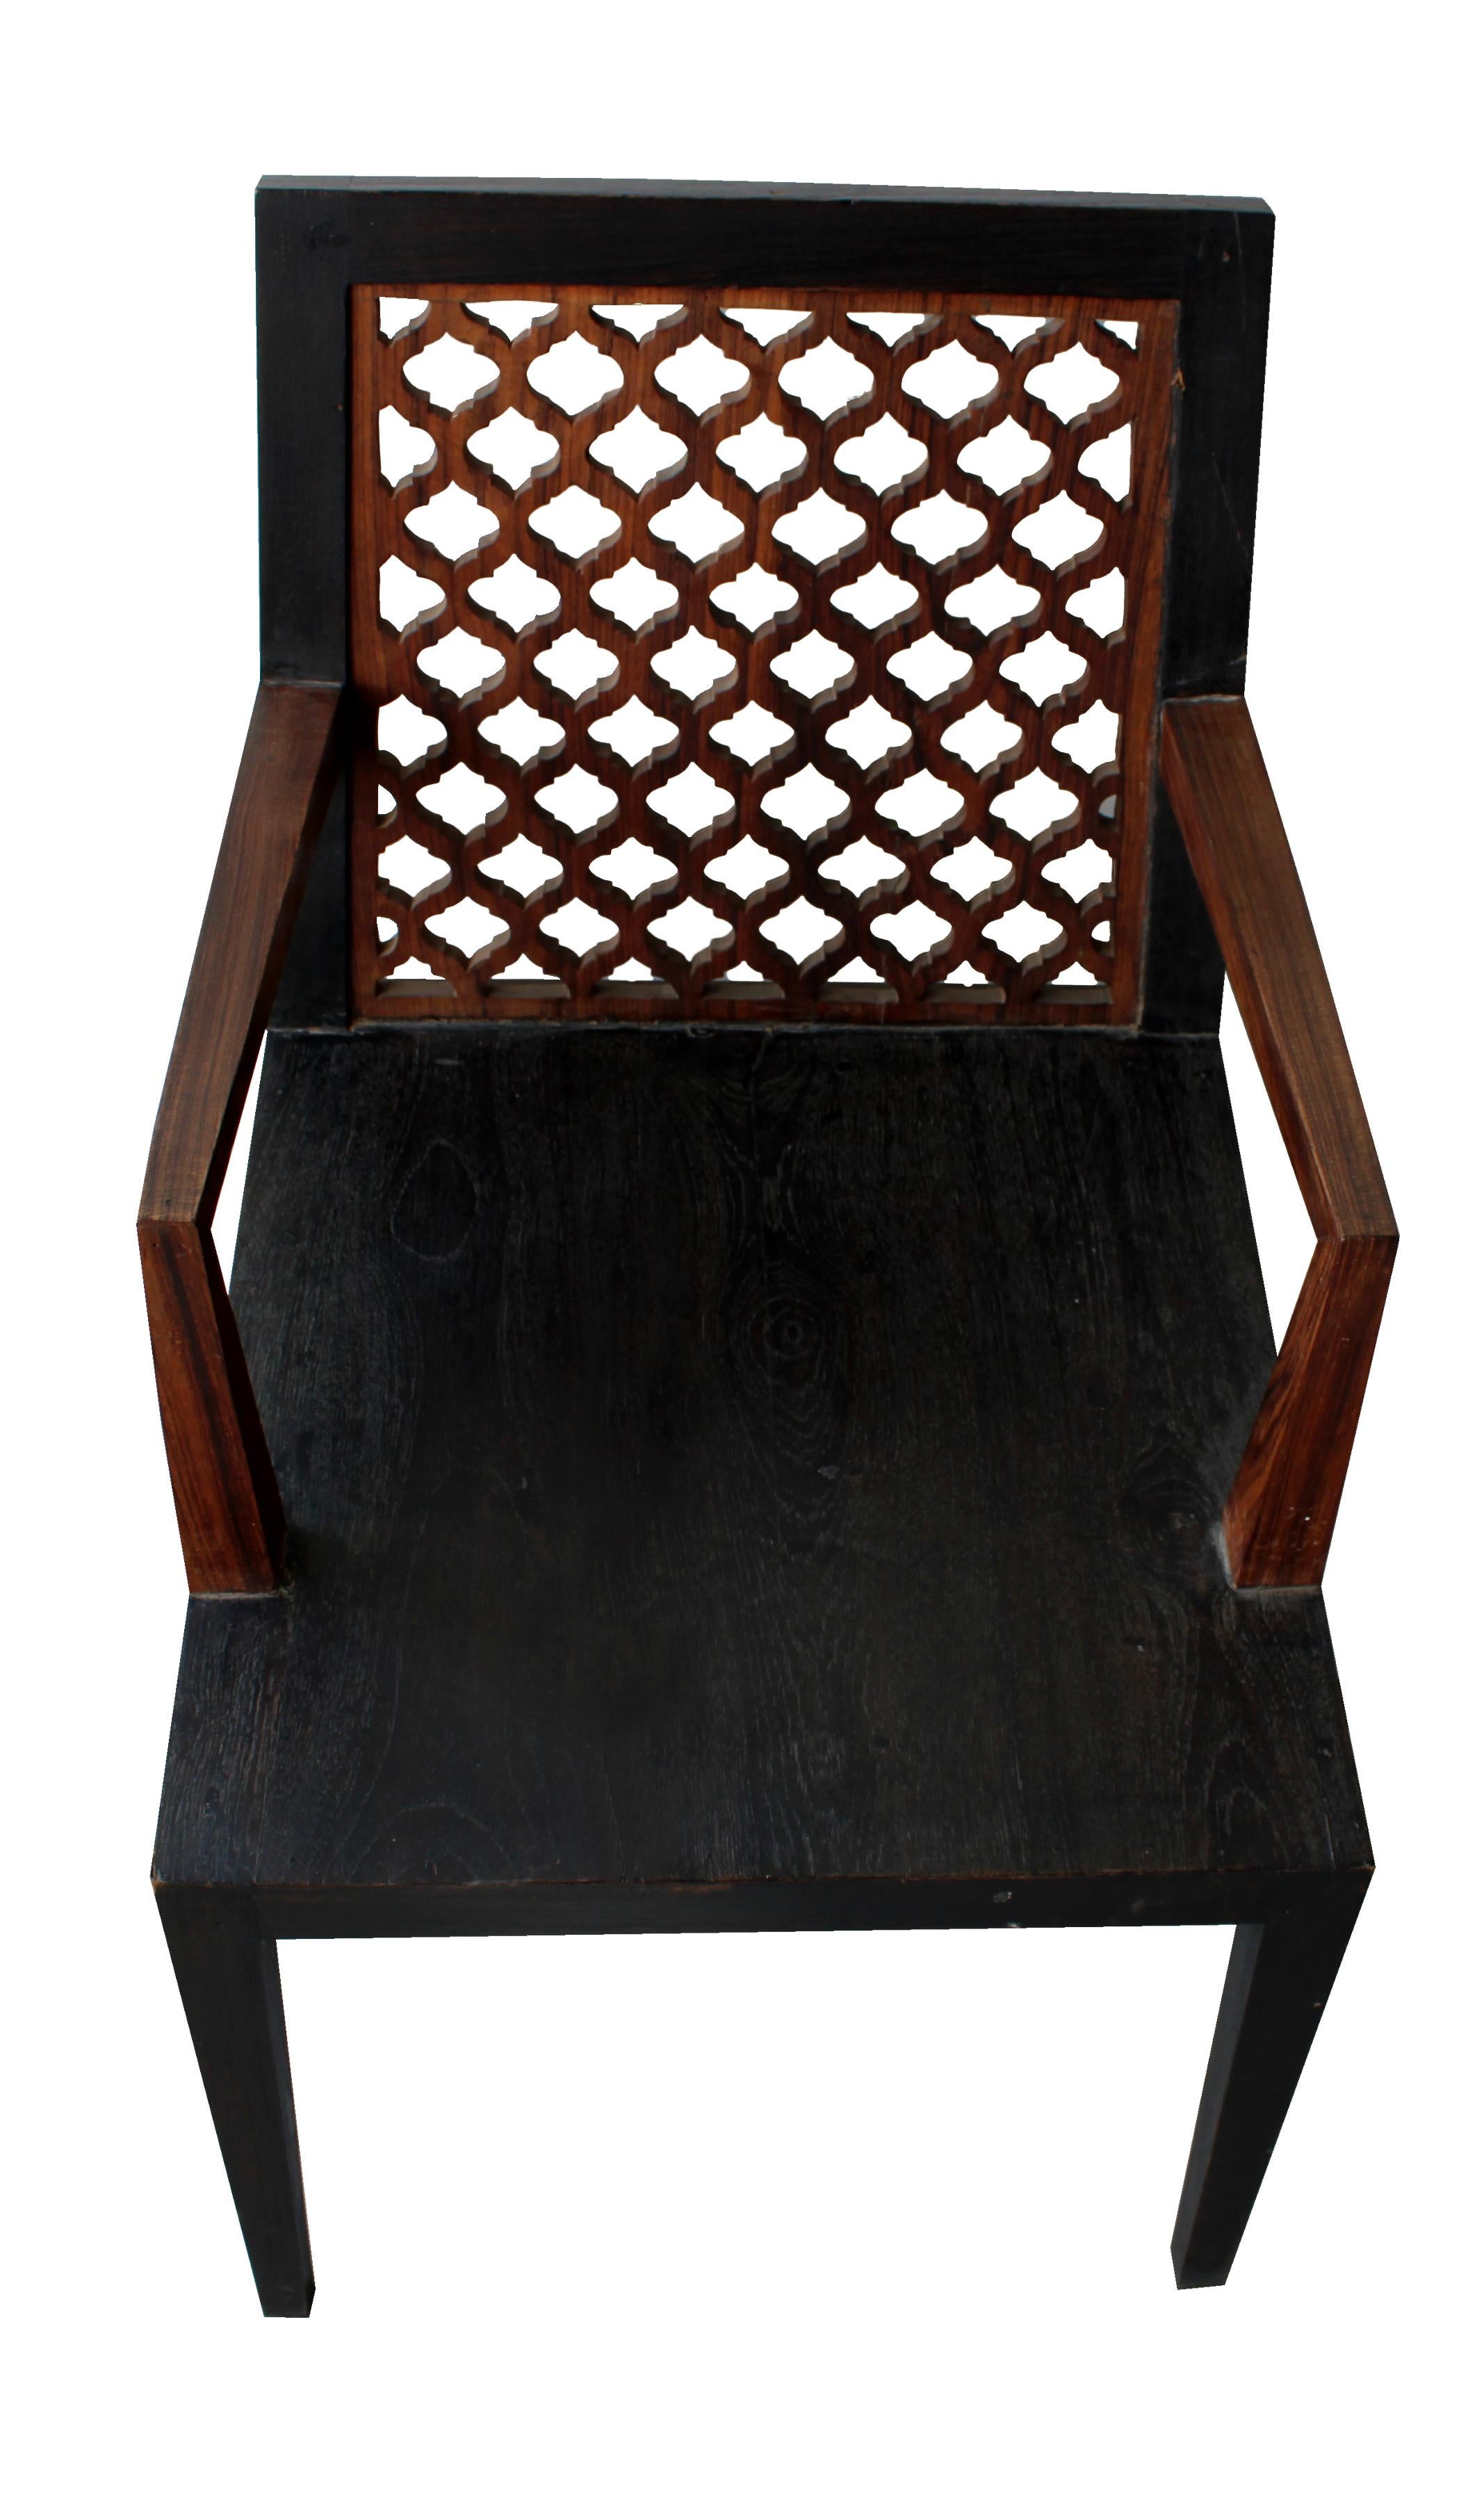 Inspired by the elegant pierced Jali pattern in the architecture he observed in and around Rajasthan, renowned designer Paul Mathieu designed this elegant char. This elegant chair is handmade from solid pieces of teak that are framed and carved to